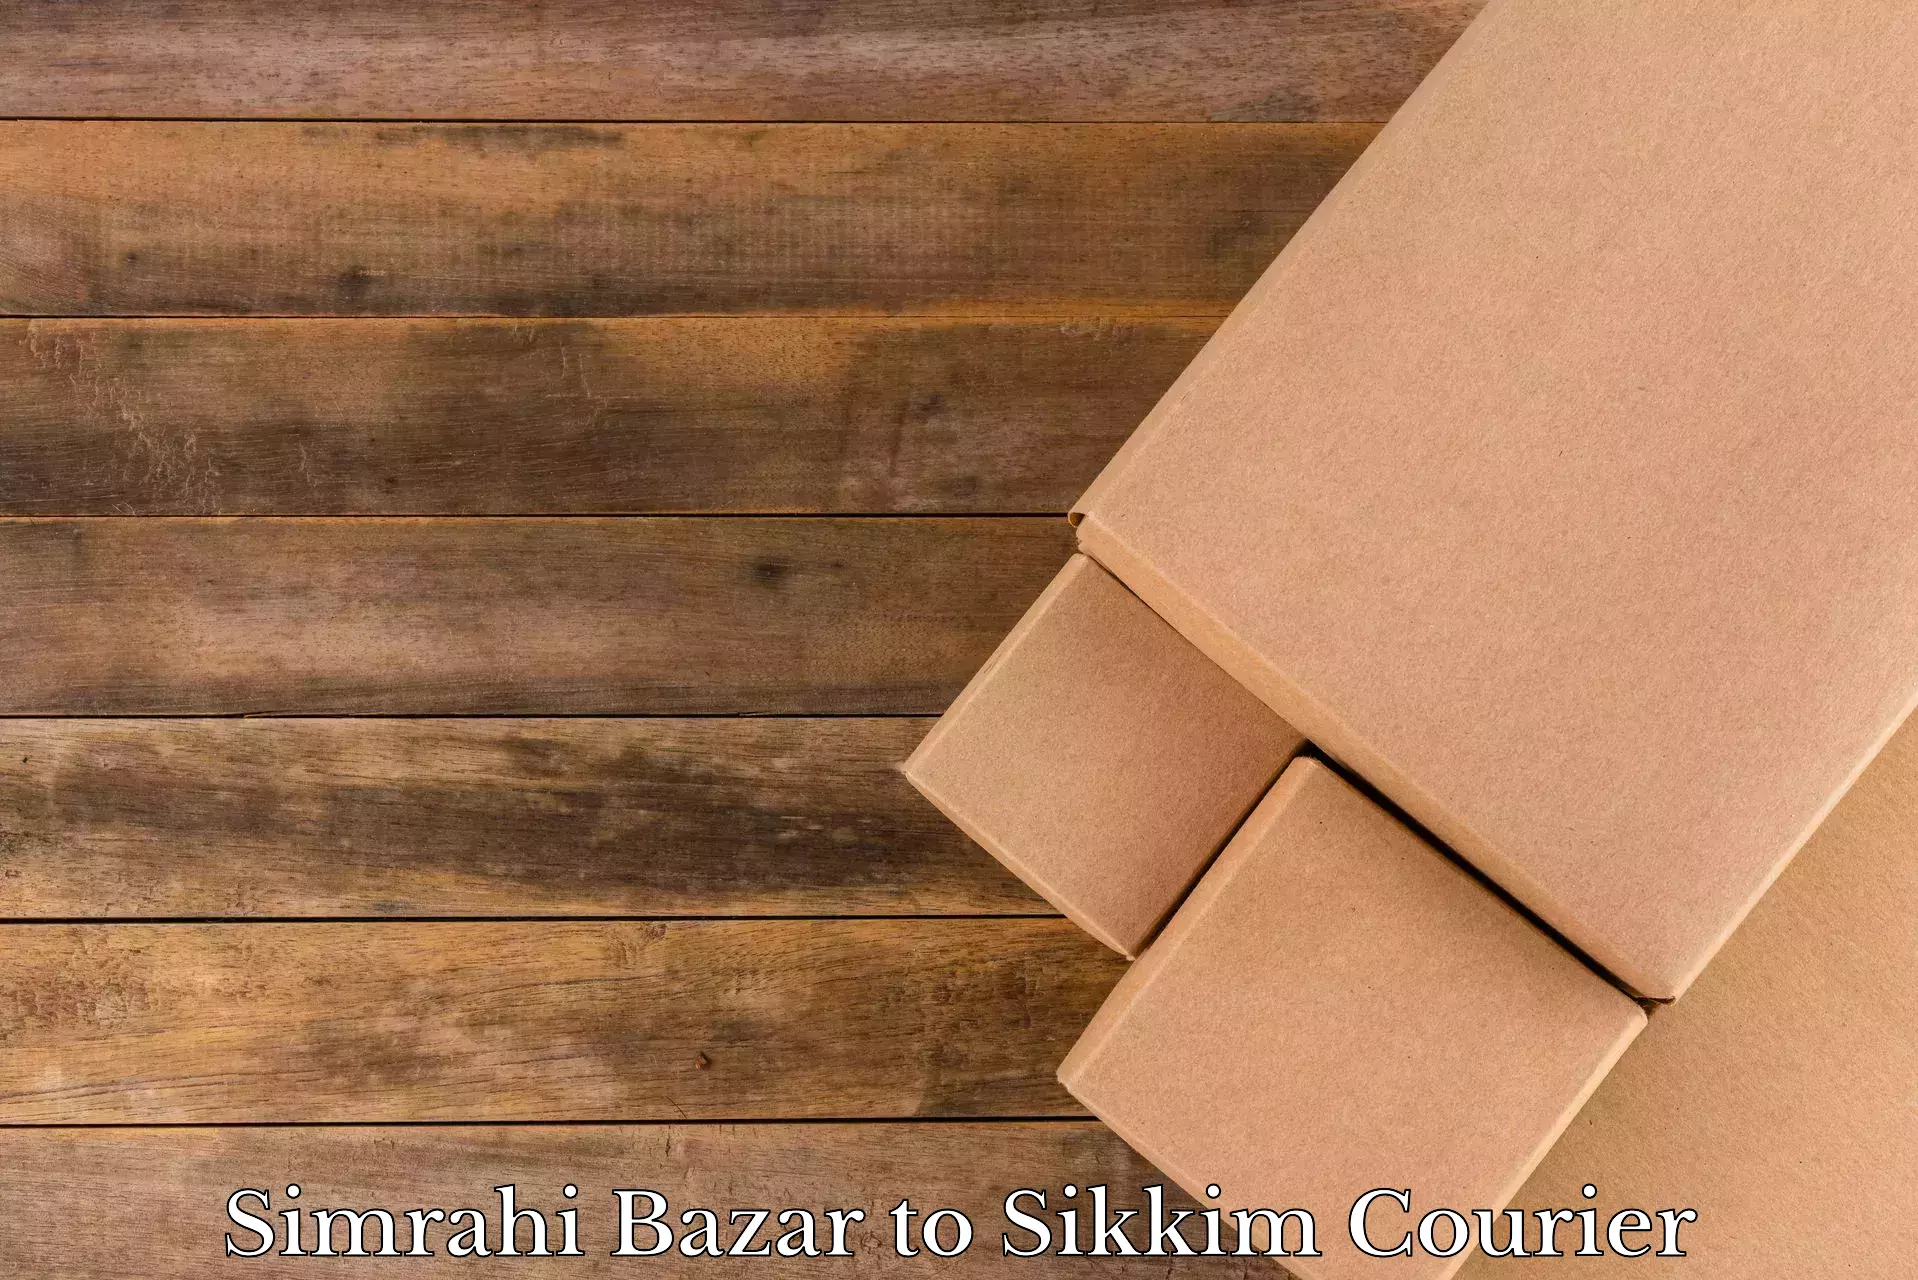 Professional relocation services Simrahi Bazar to Pelling